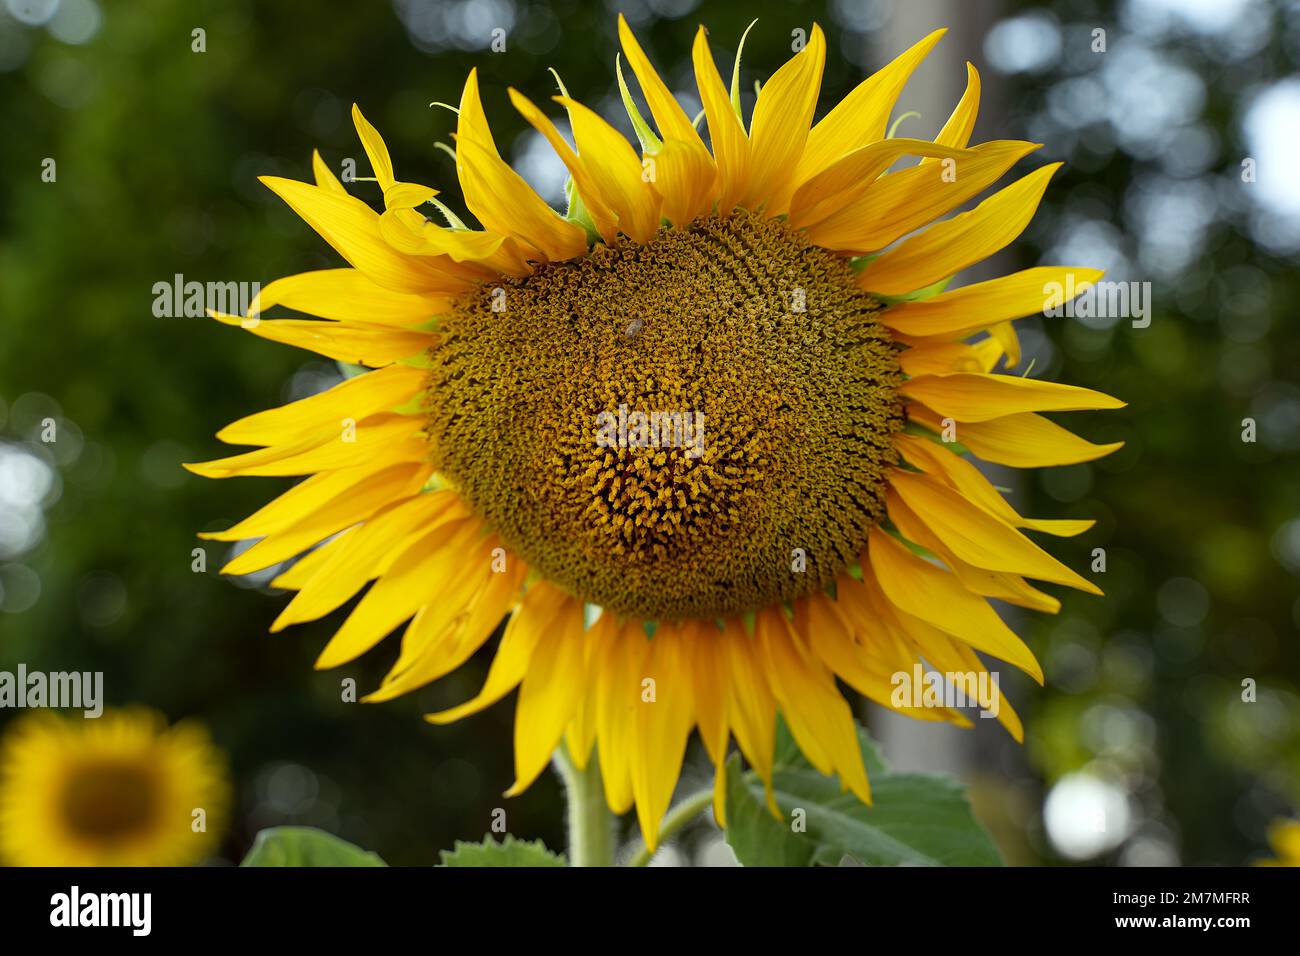 Ugly sunflower head. Yellow sunflower against the sky. Underdeveloped yellow head of a sunflower. A flawed plant. Stock Photo